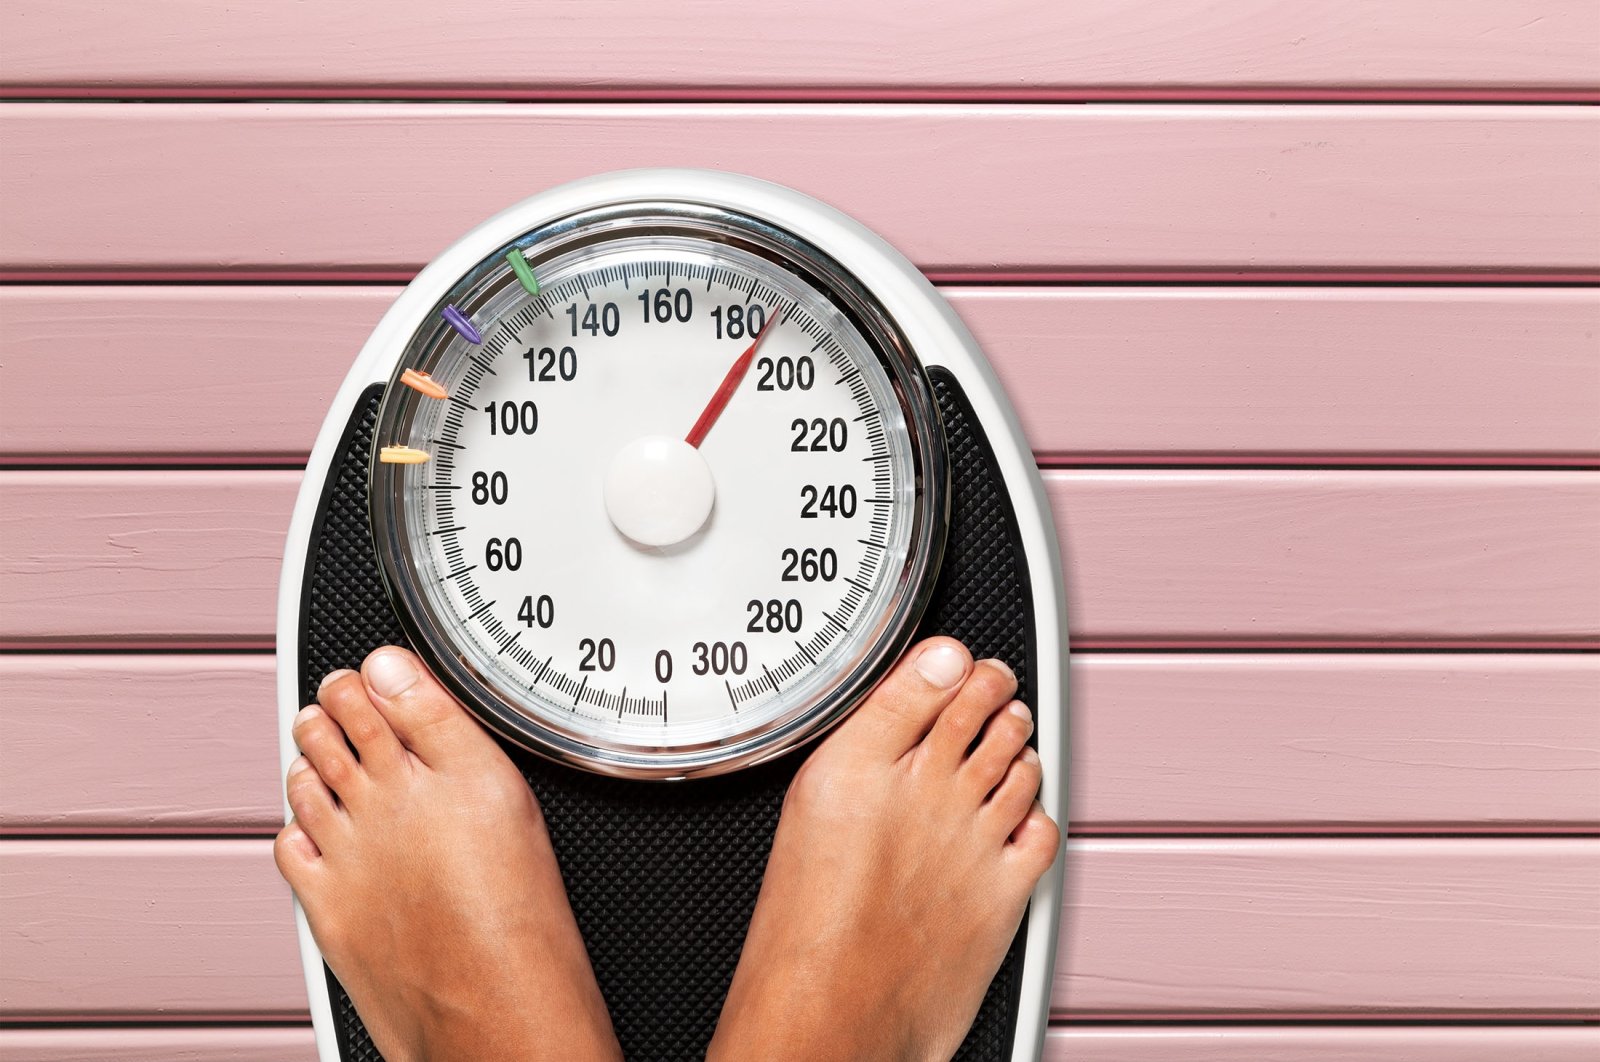 Women were more likely than men to gain weight during the first year of the COVID-19 pandemic. (Shutterstock Photo)